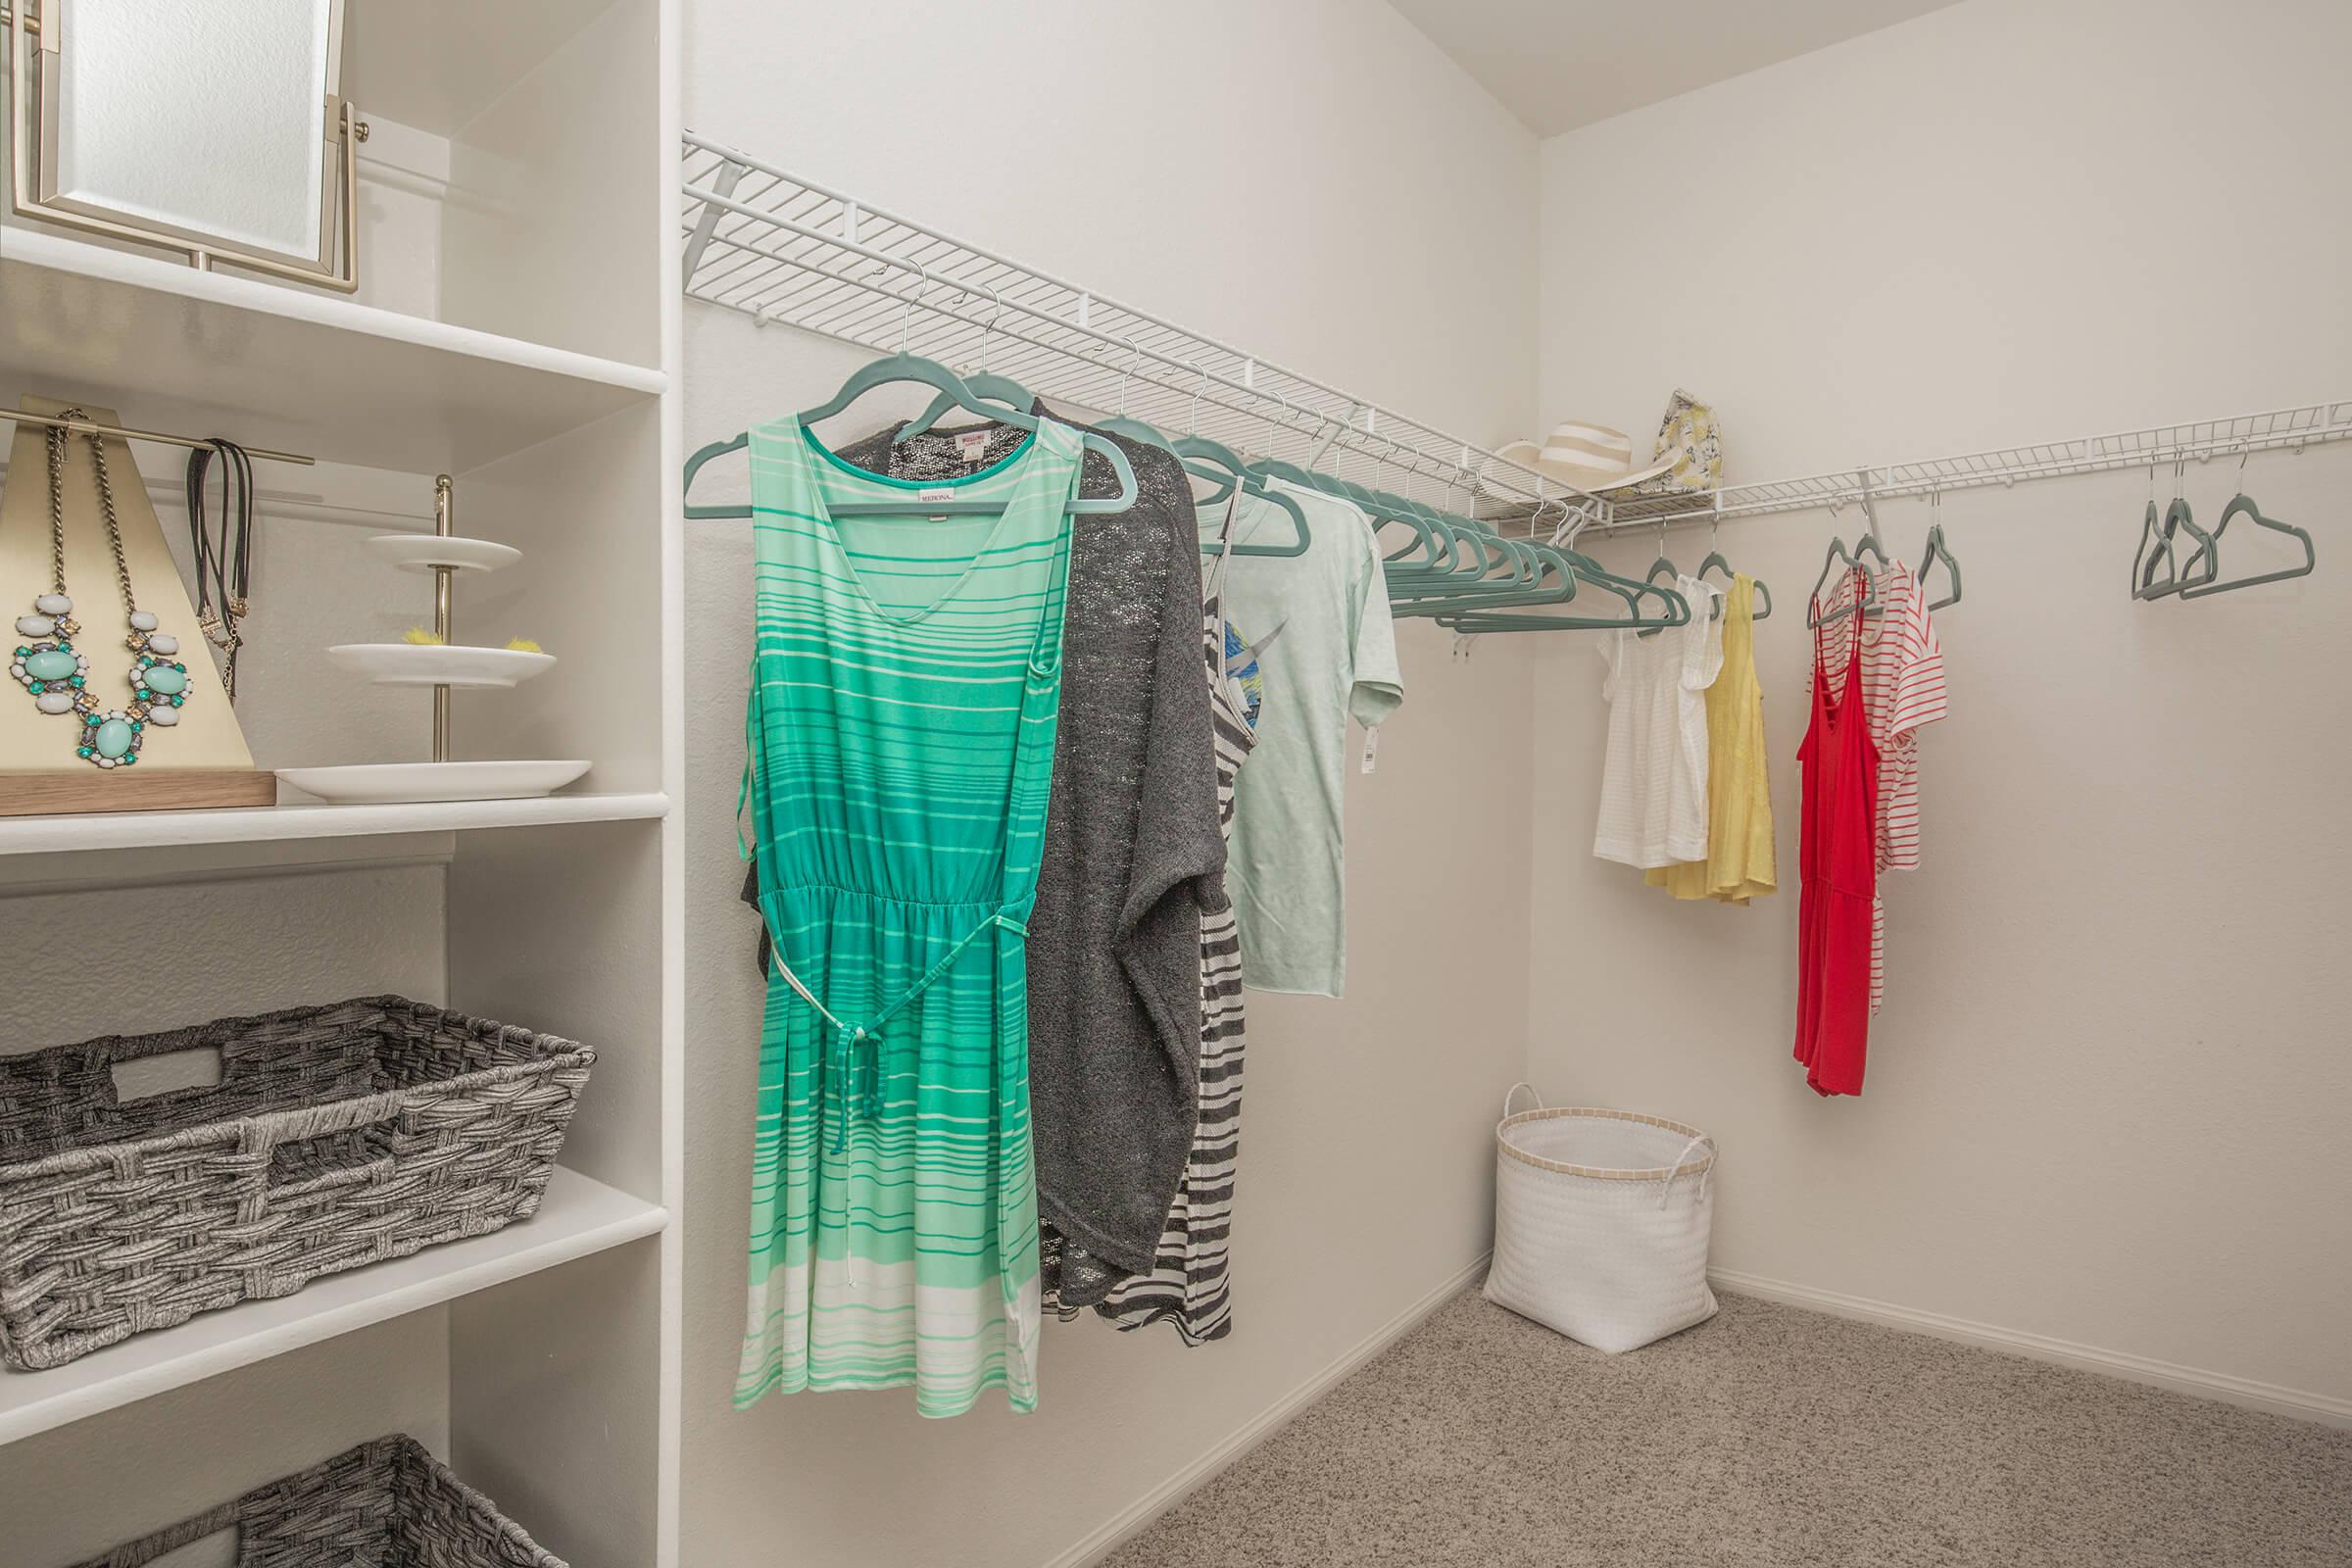 Walk-in closet with clothes